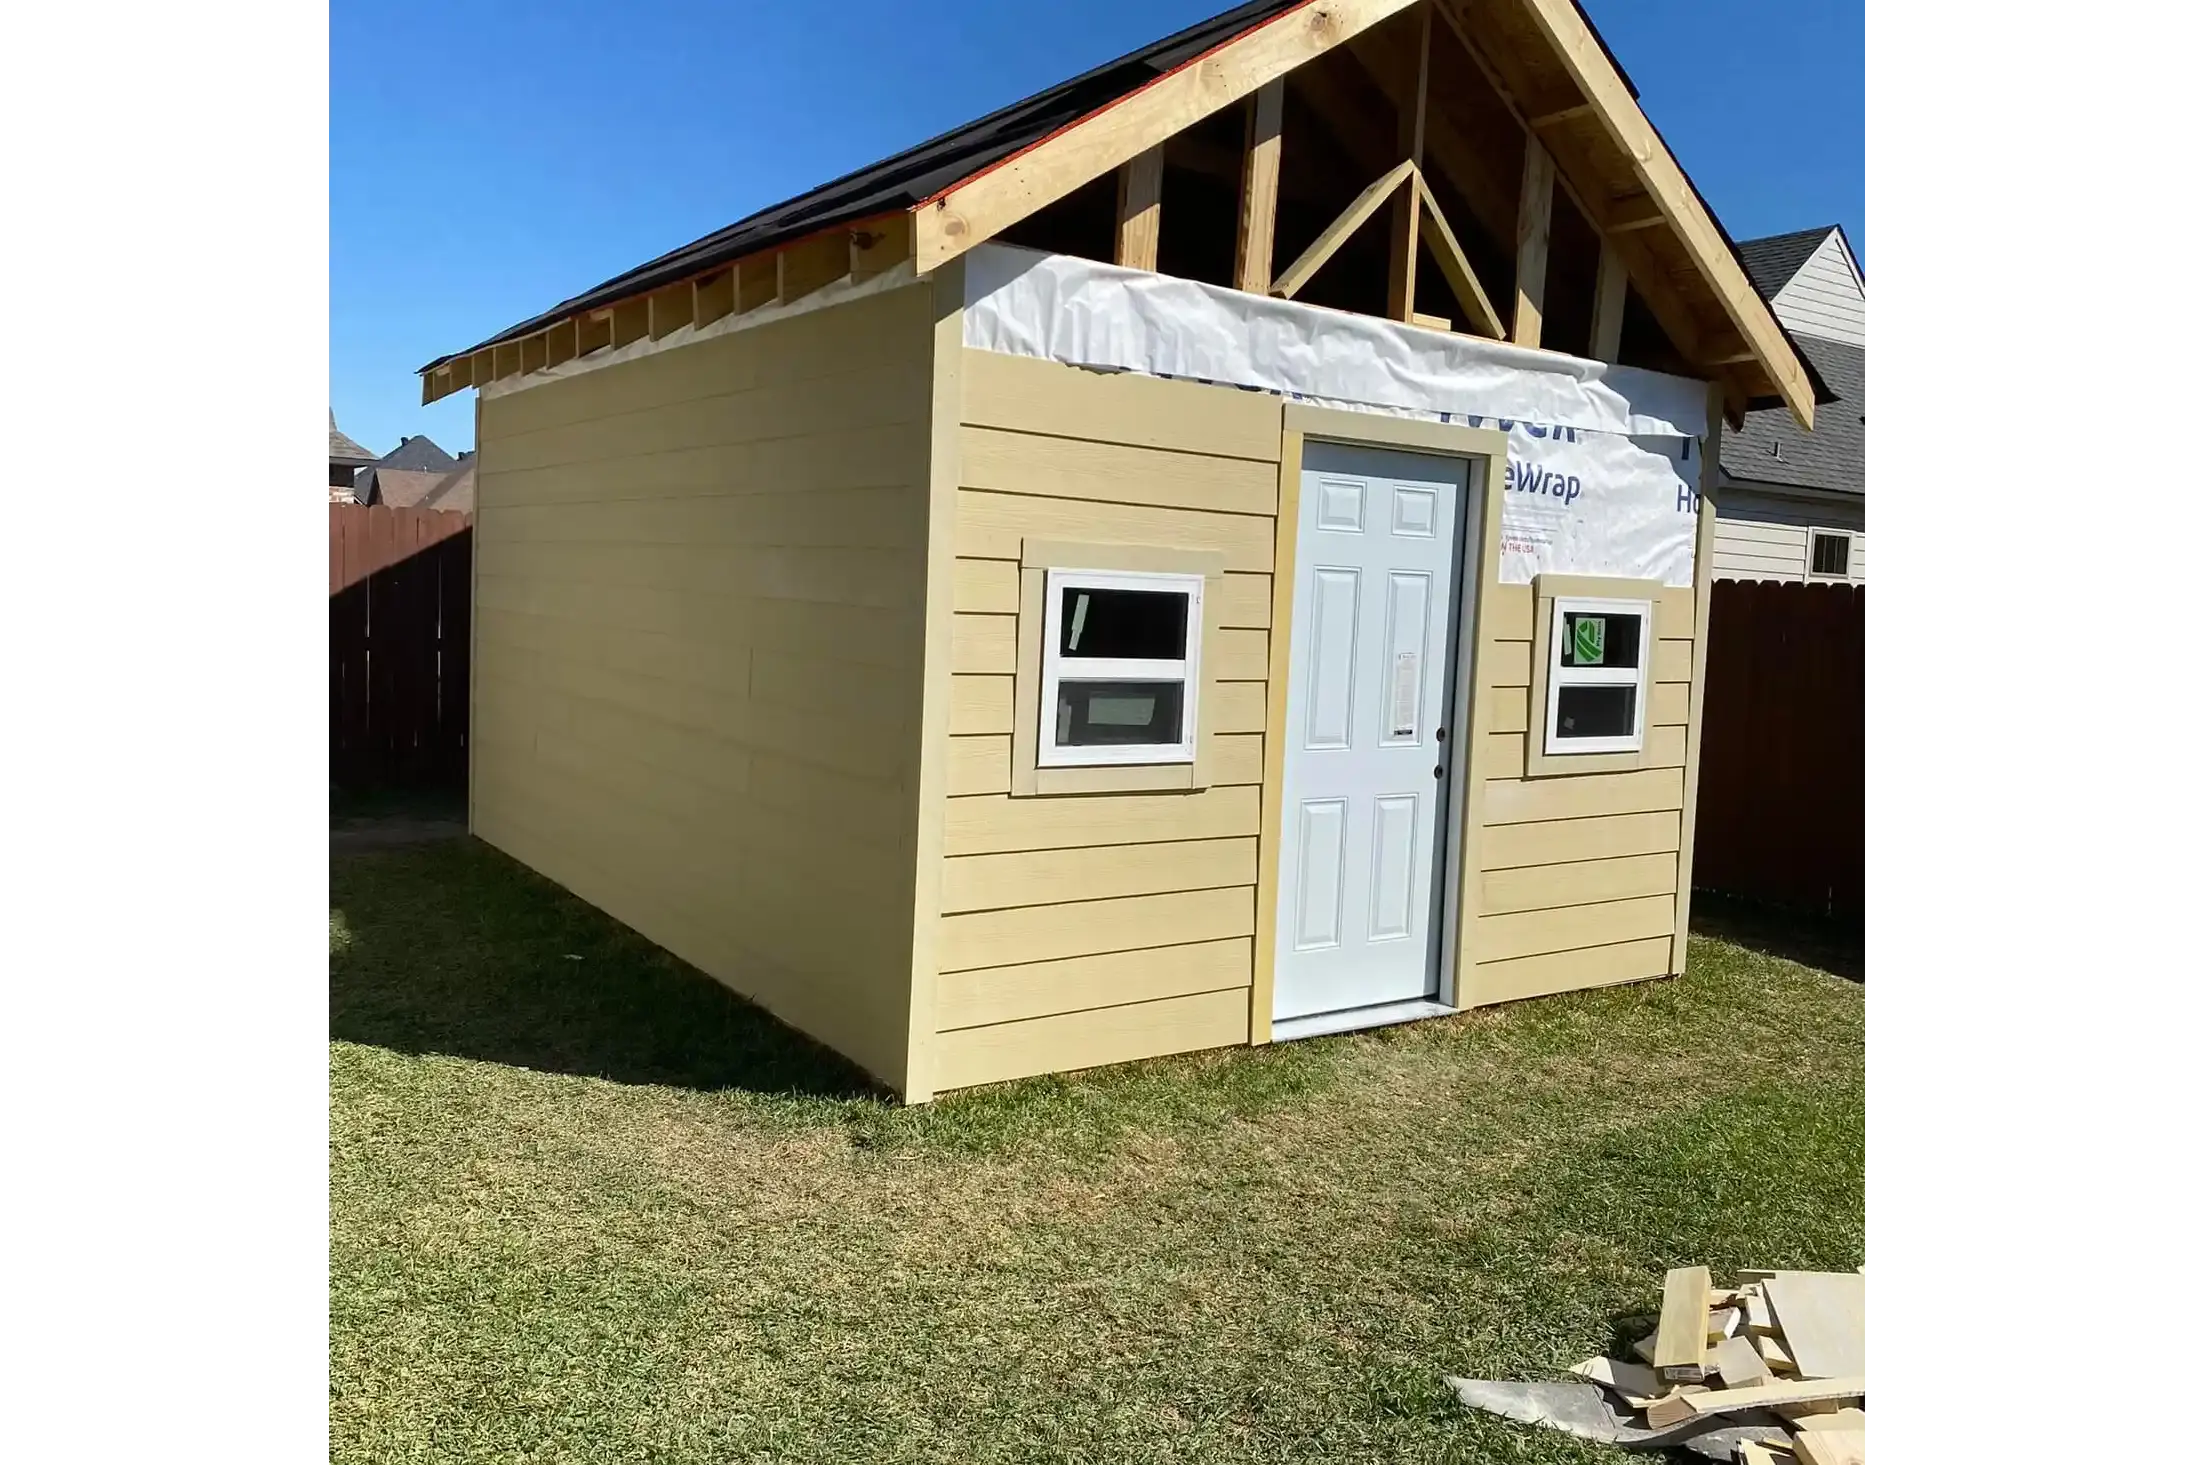 Exterior for Primeaux's Handyman Services in Youngsville, Louisiana